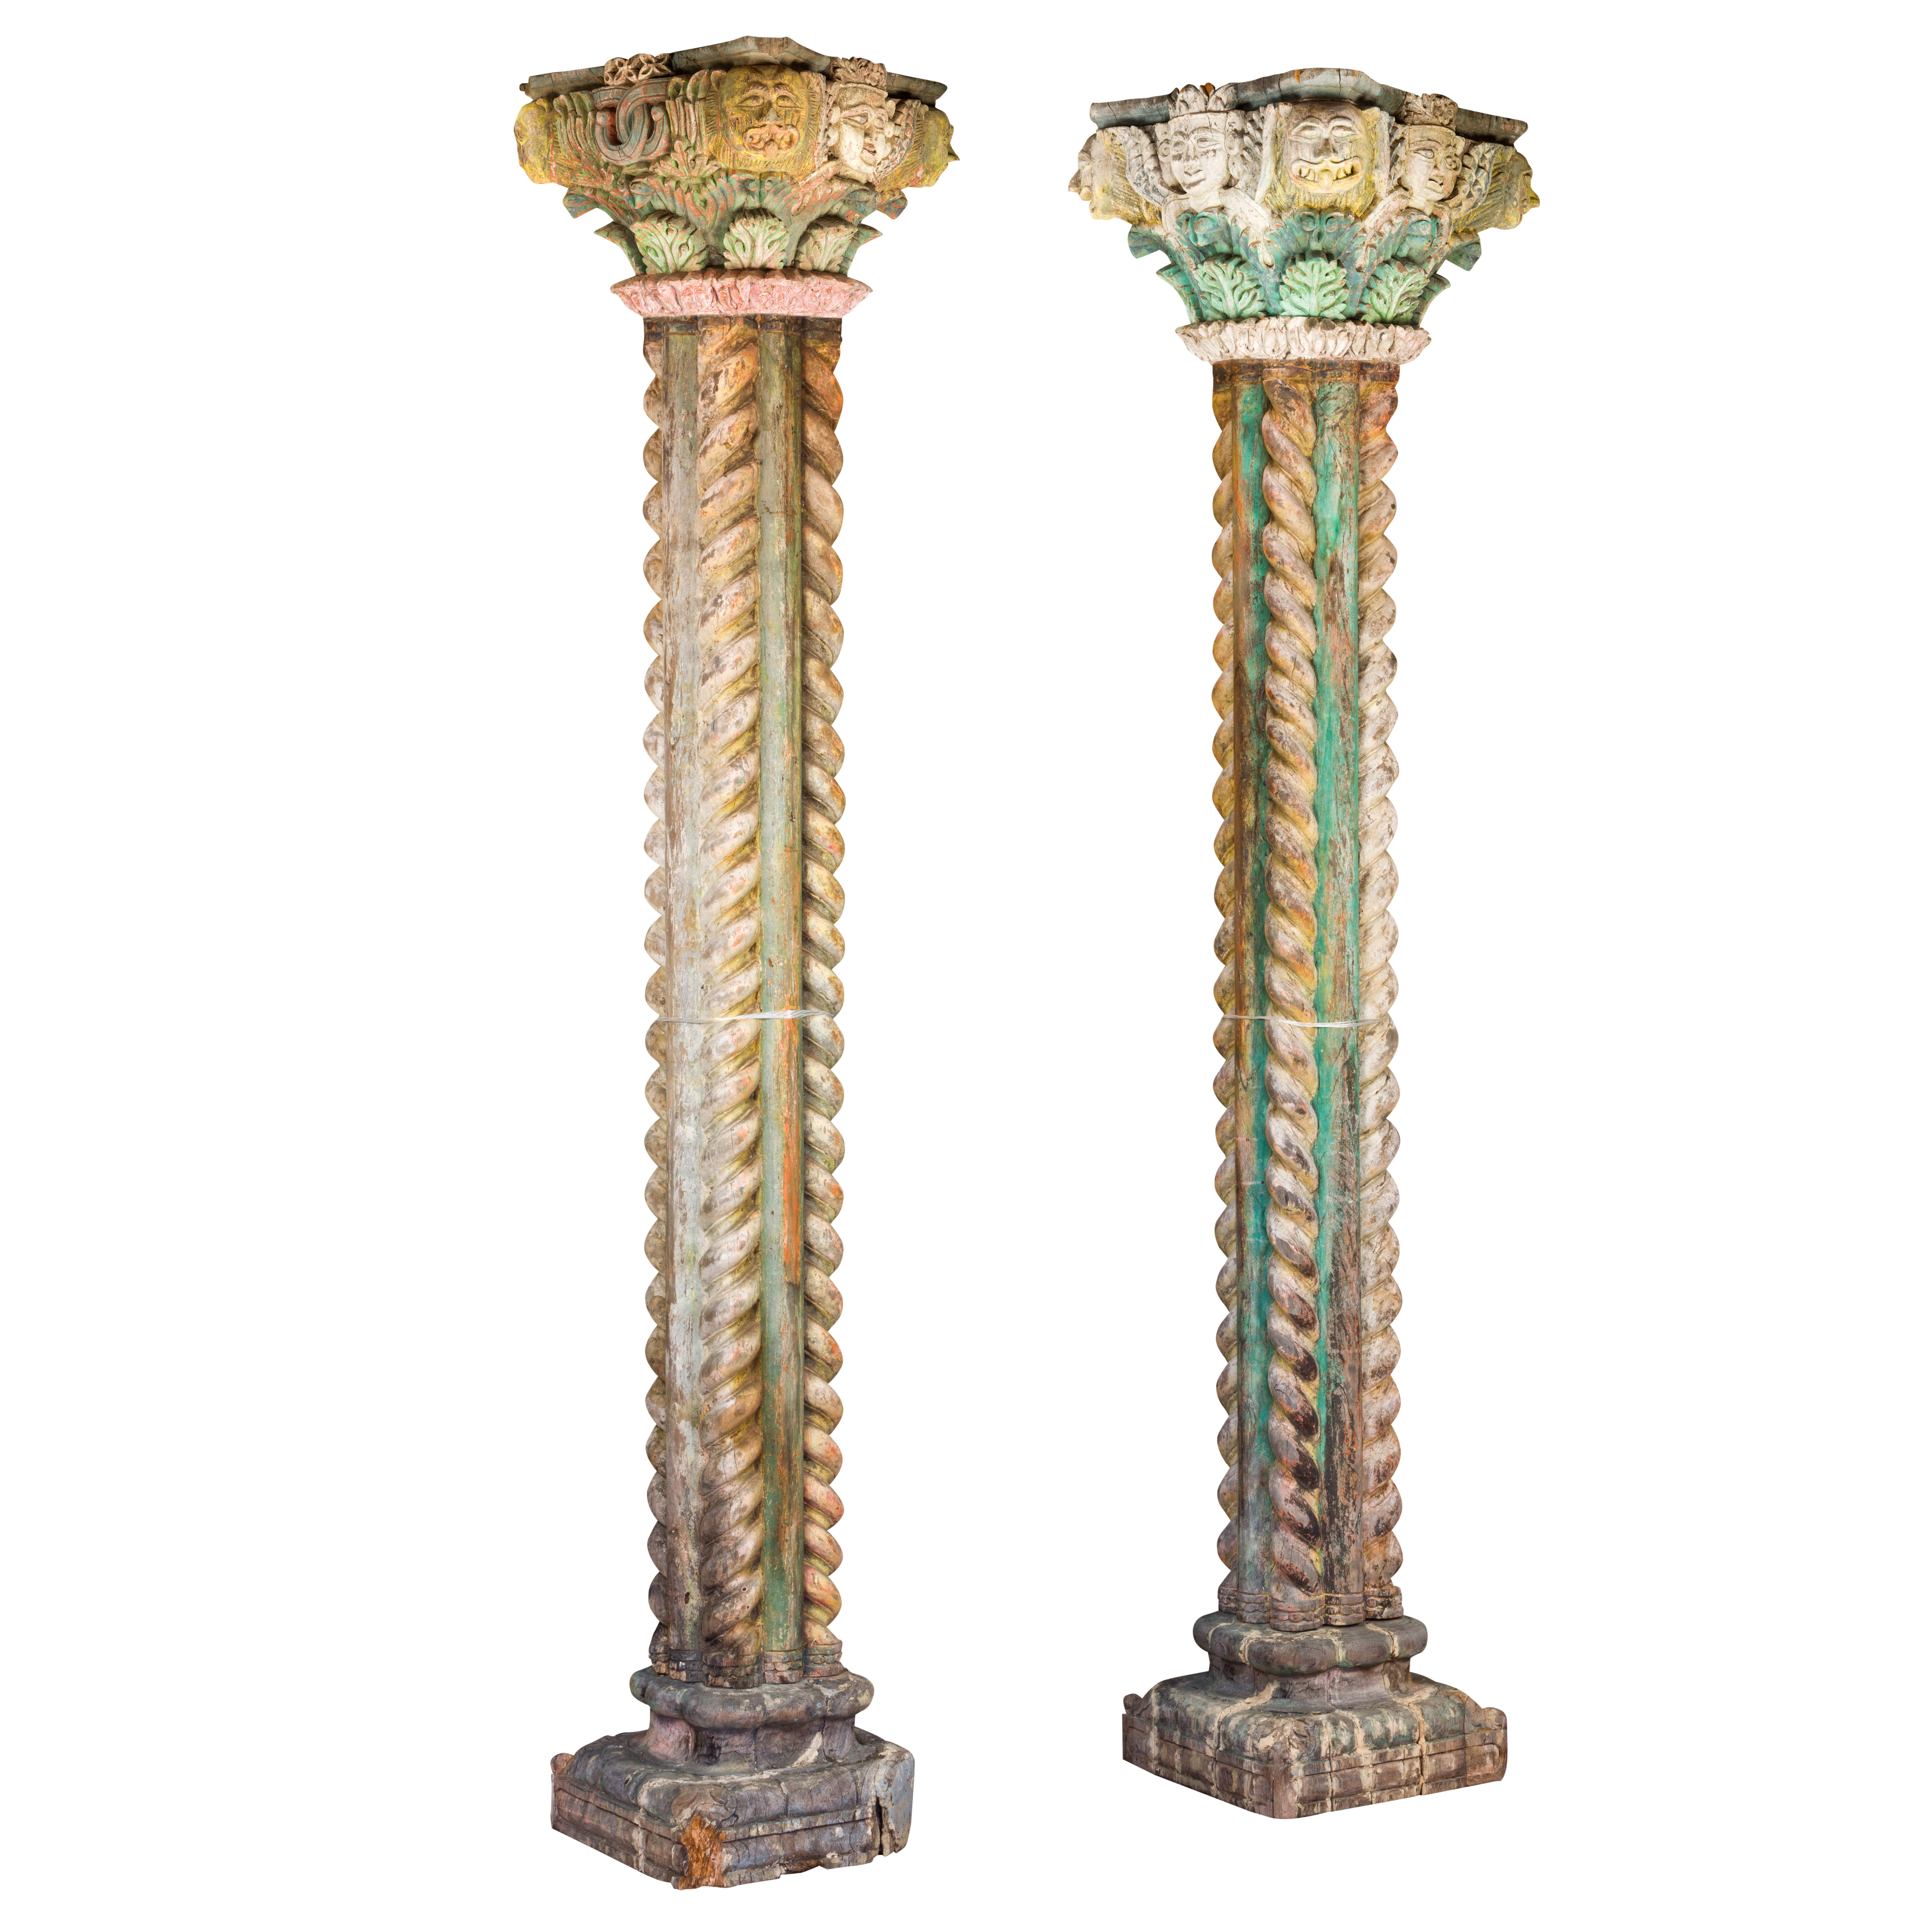 A MONUMENTAL PAIR OF EAST INDIAN